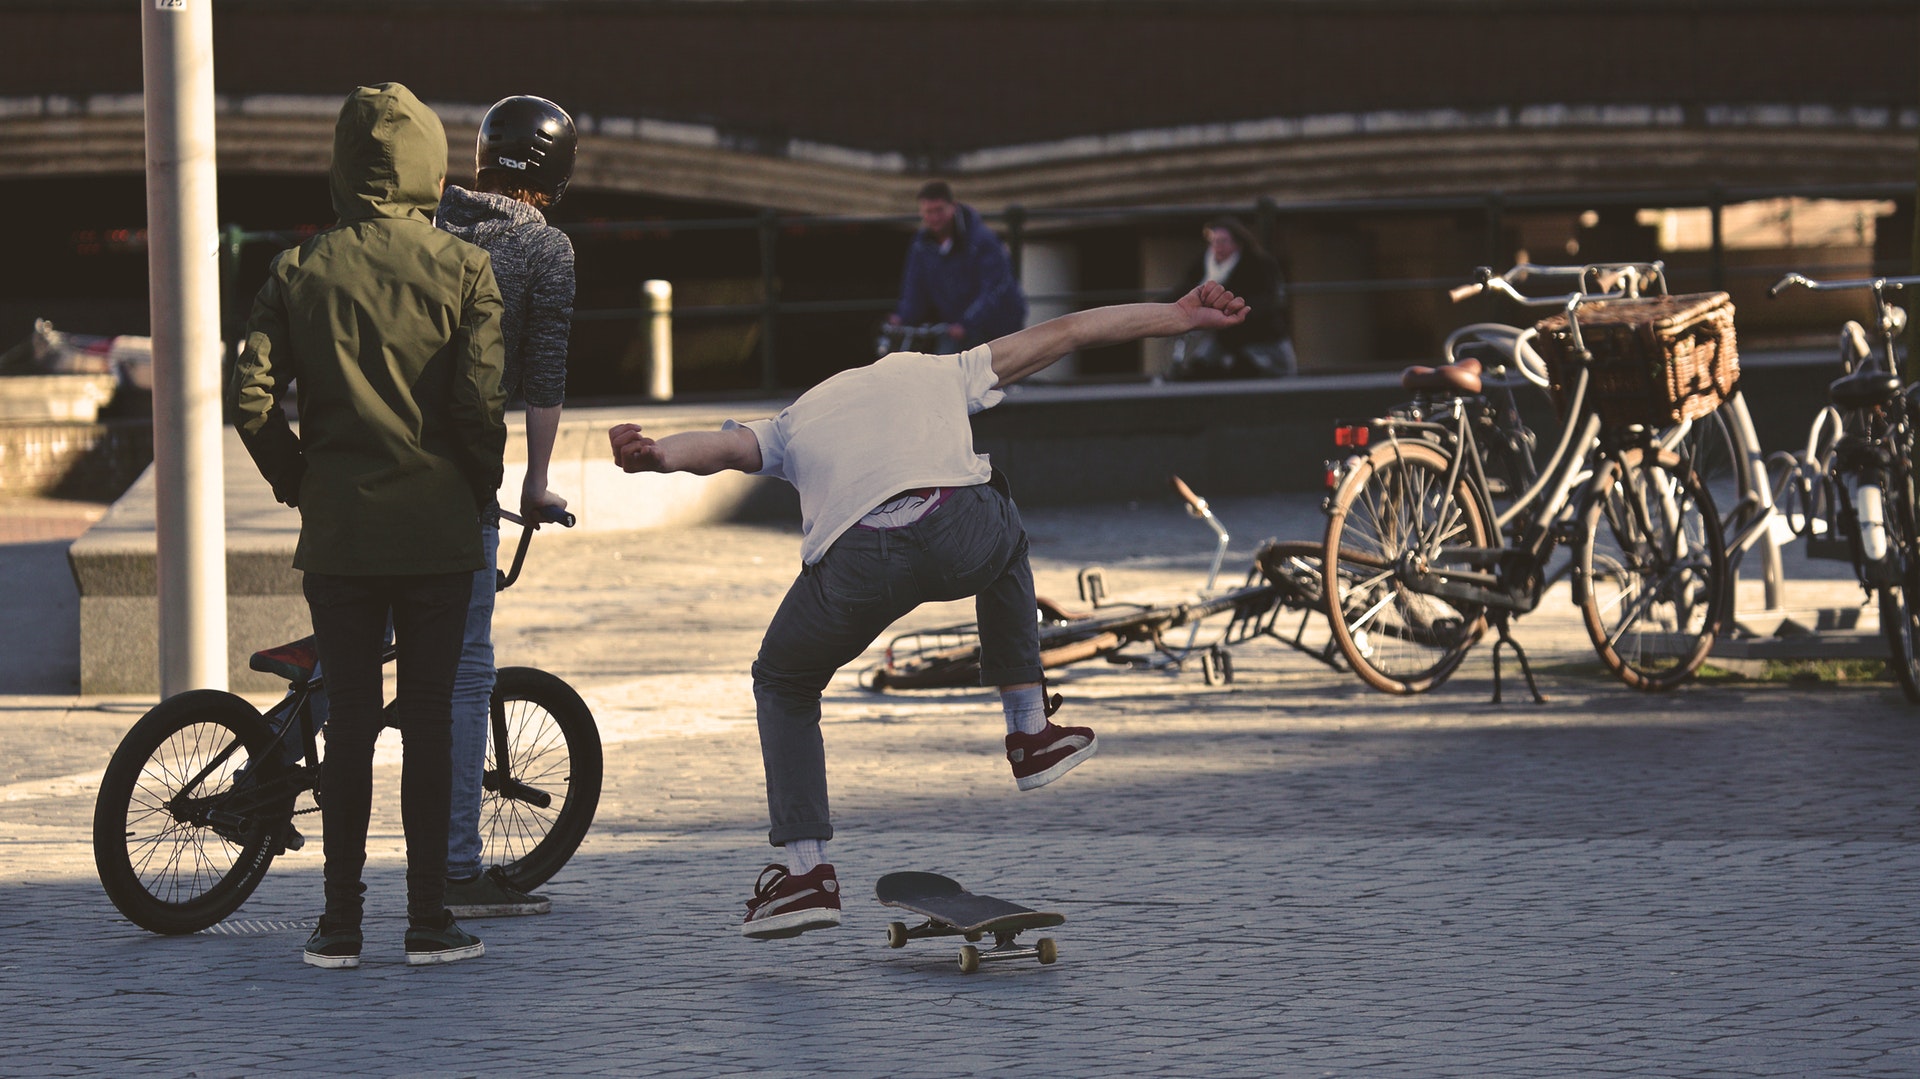 Skater with Bikers